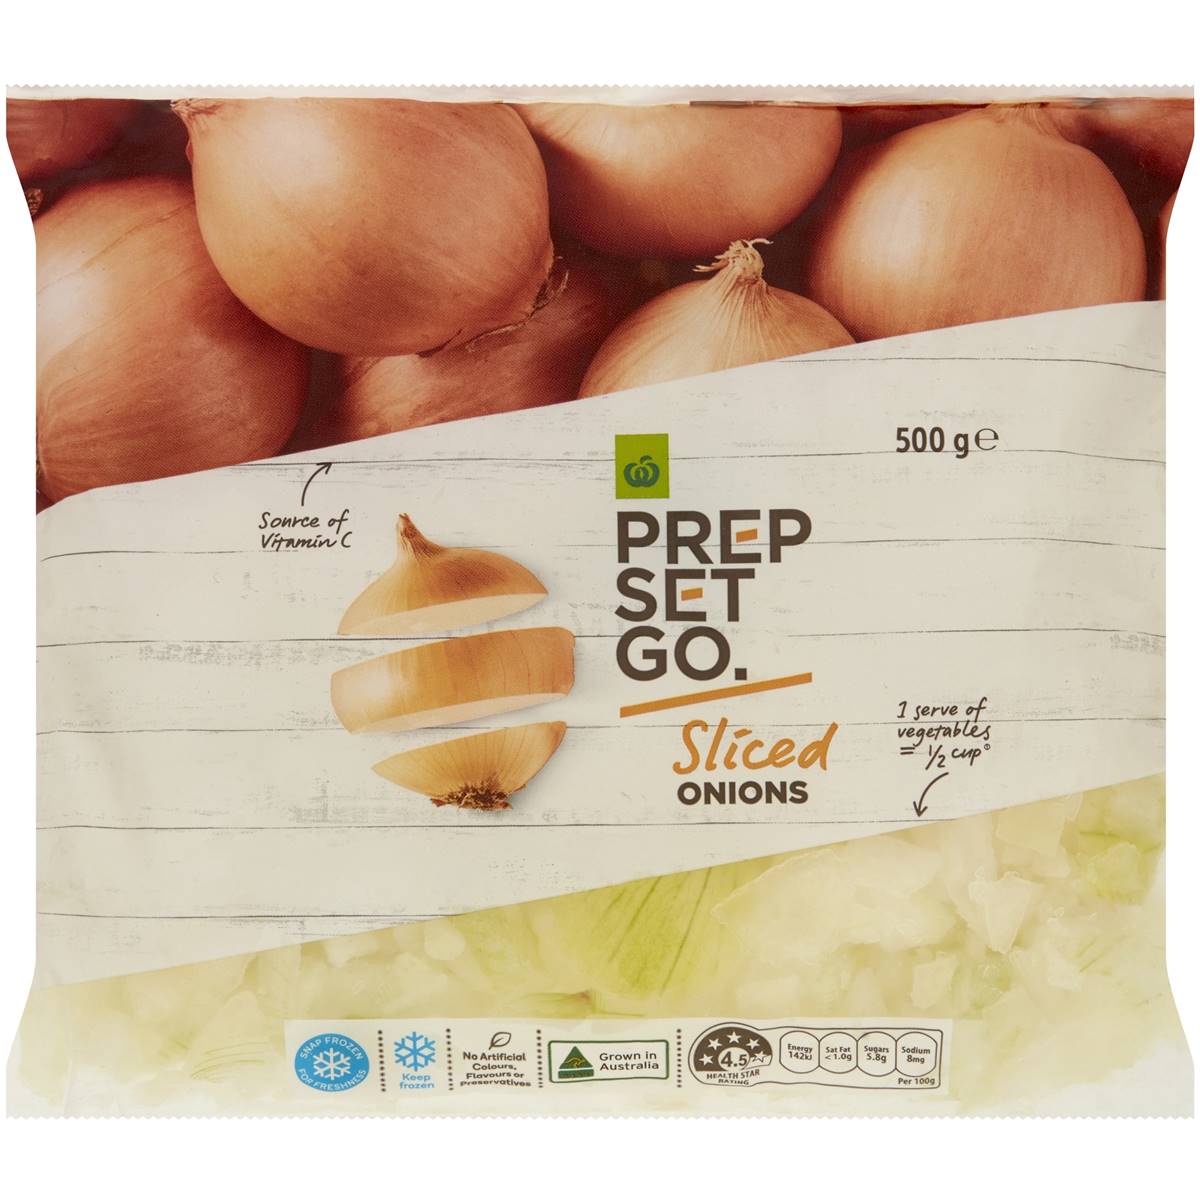 Calories in Woolworths Prep Set Go Sliced Onions